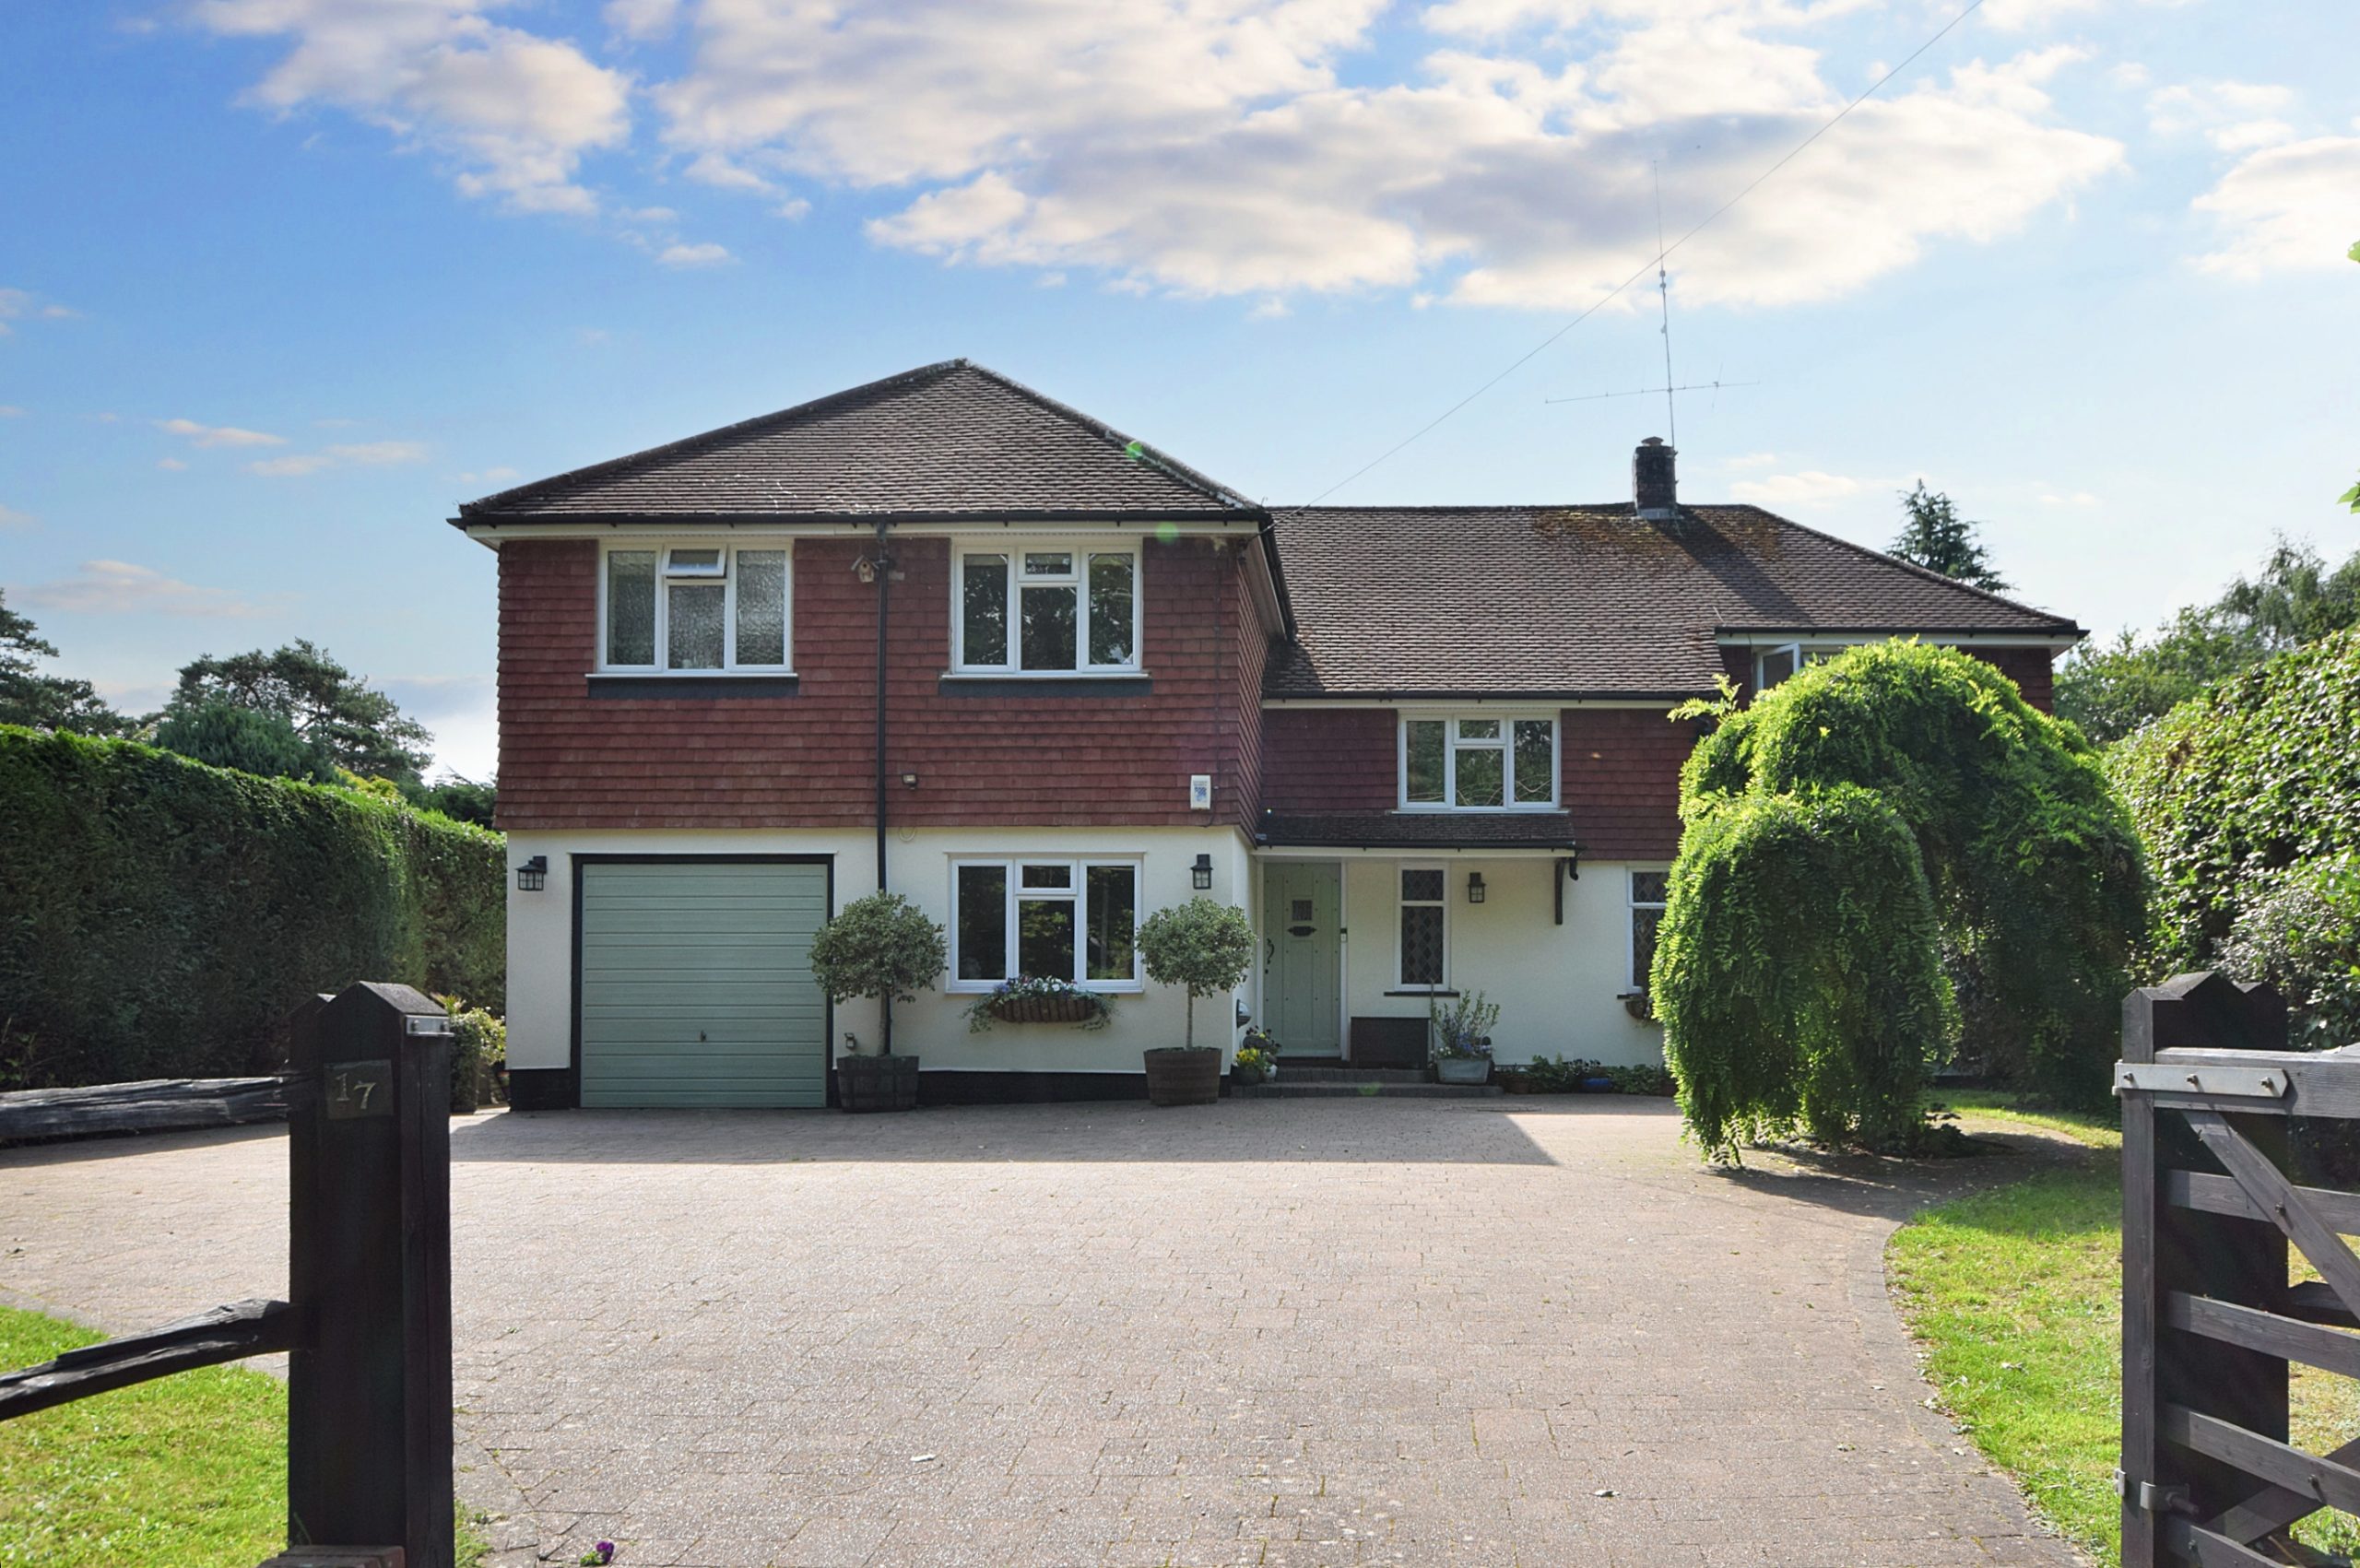 Another SALE AGREED! Fringes of Farnham Park